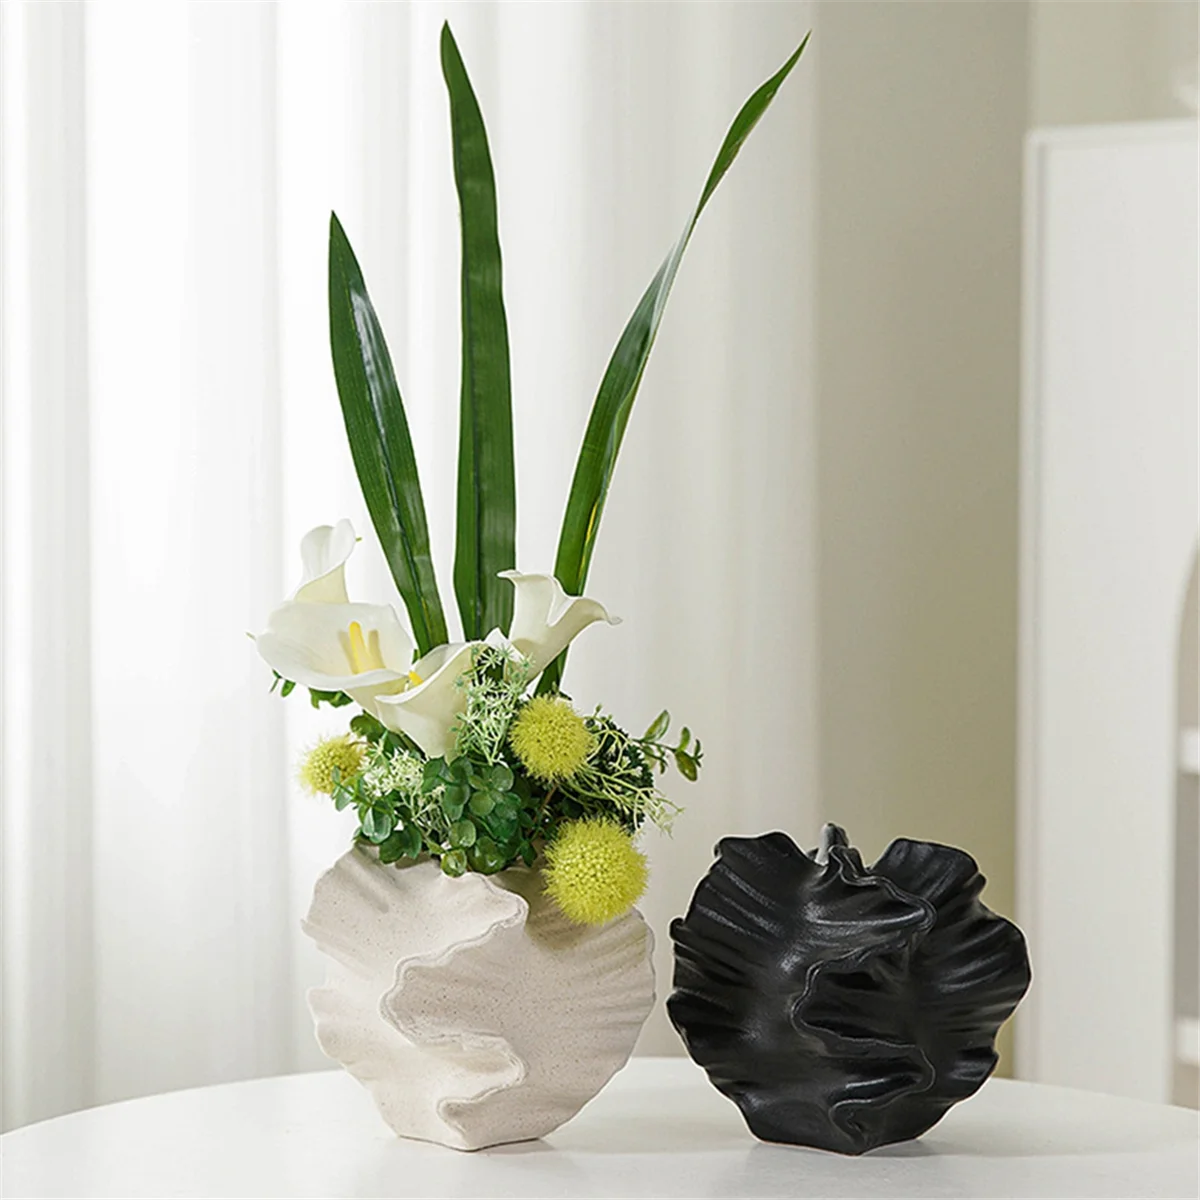 

Coral Vase Nordic Art Container for Flower Pampas Grass Vase Living Room Tabletop Centerpieces Decor Creamy-White B